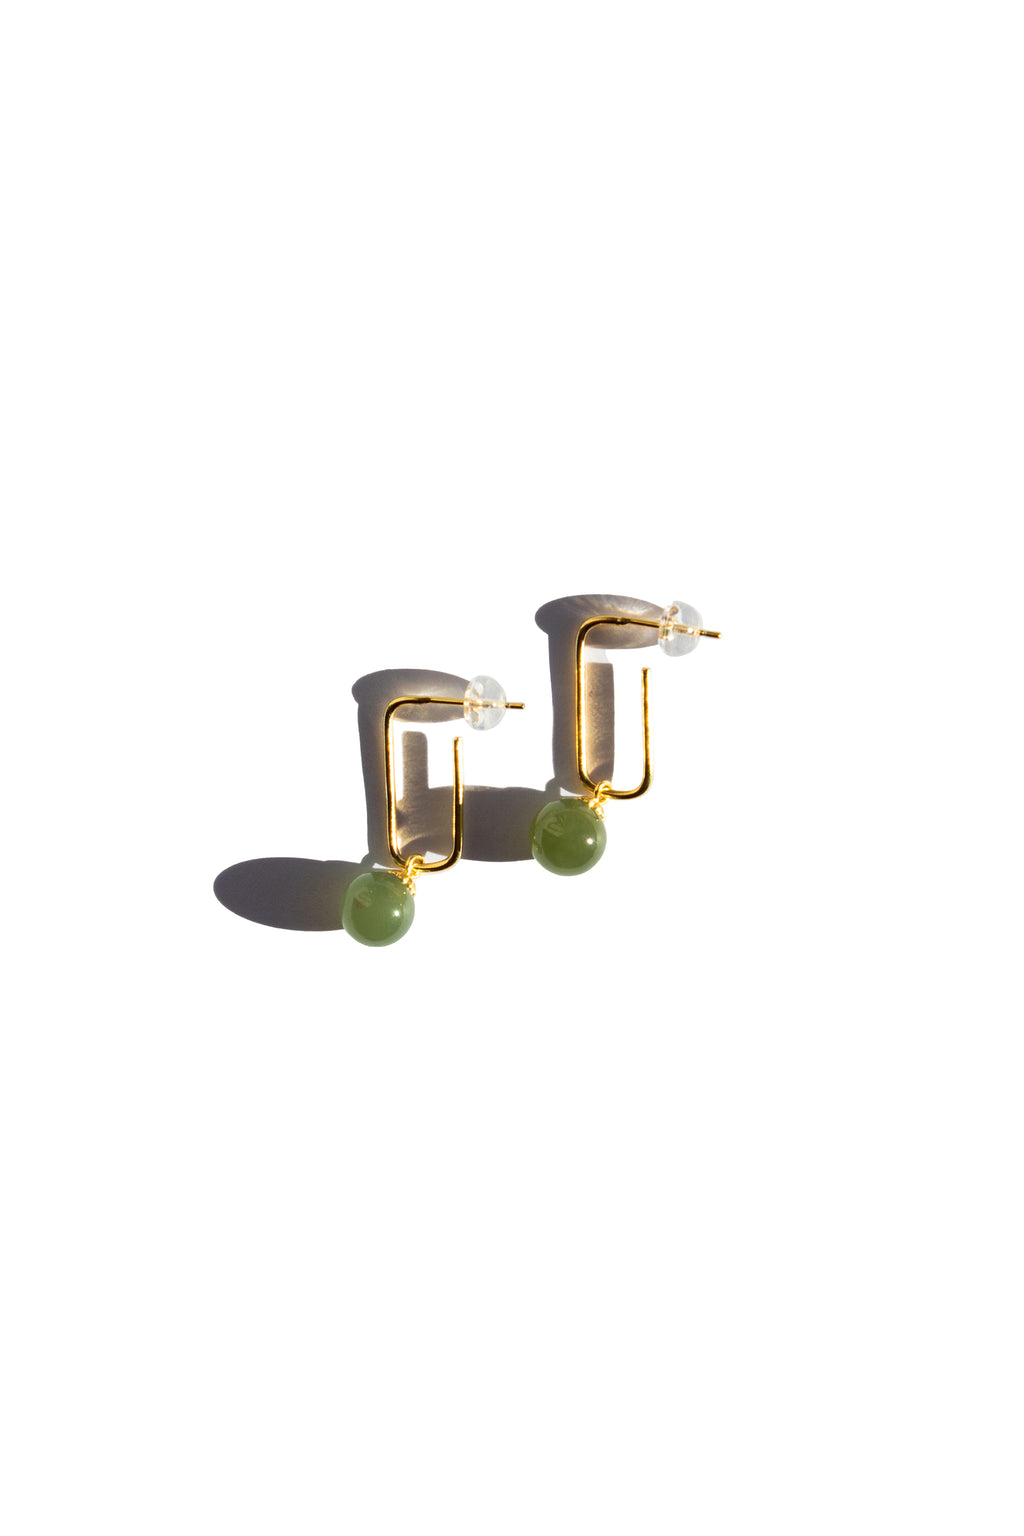 seree-gold-pin-earrings-with-green-nephrite-bead